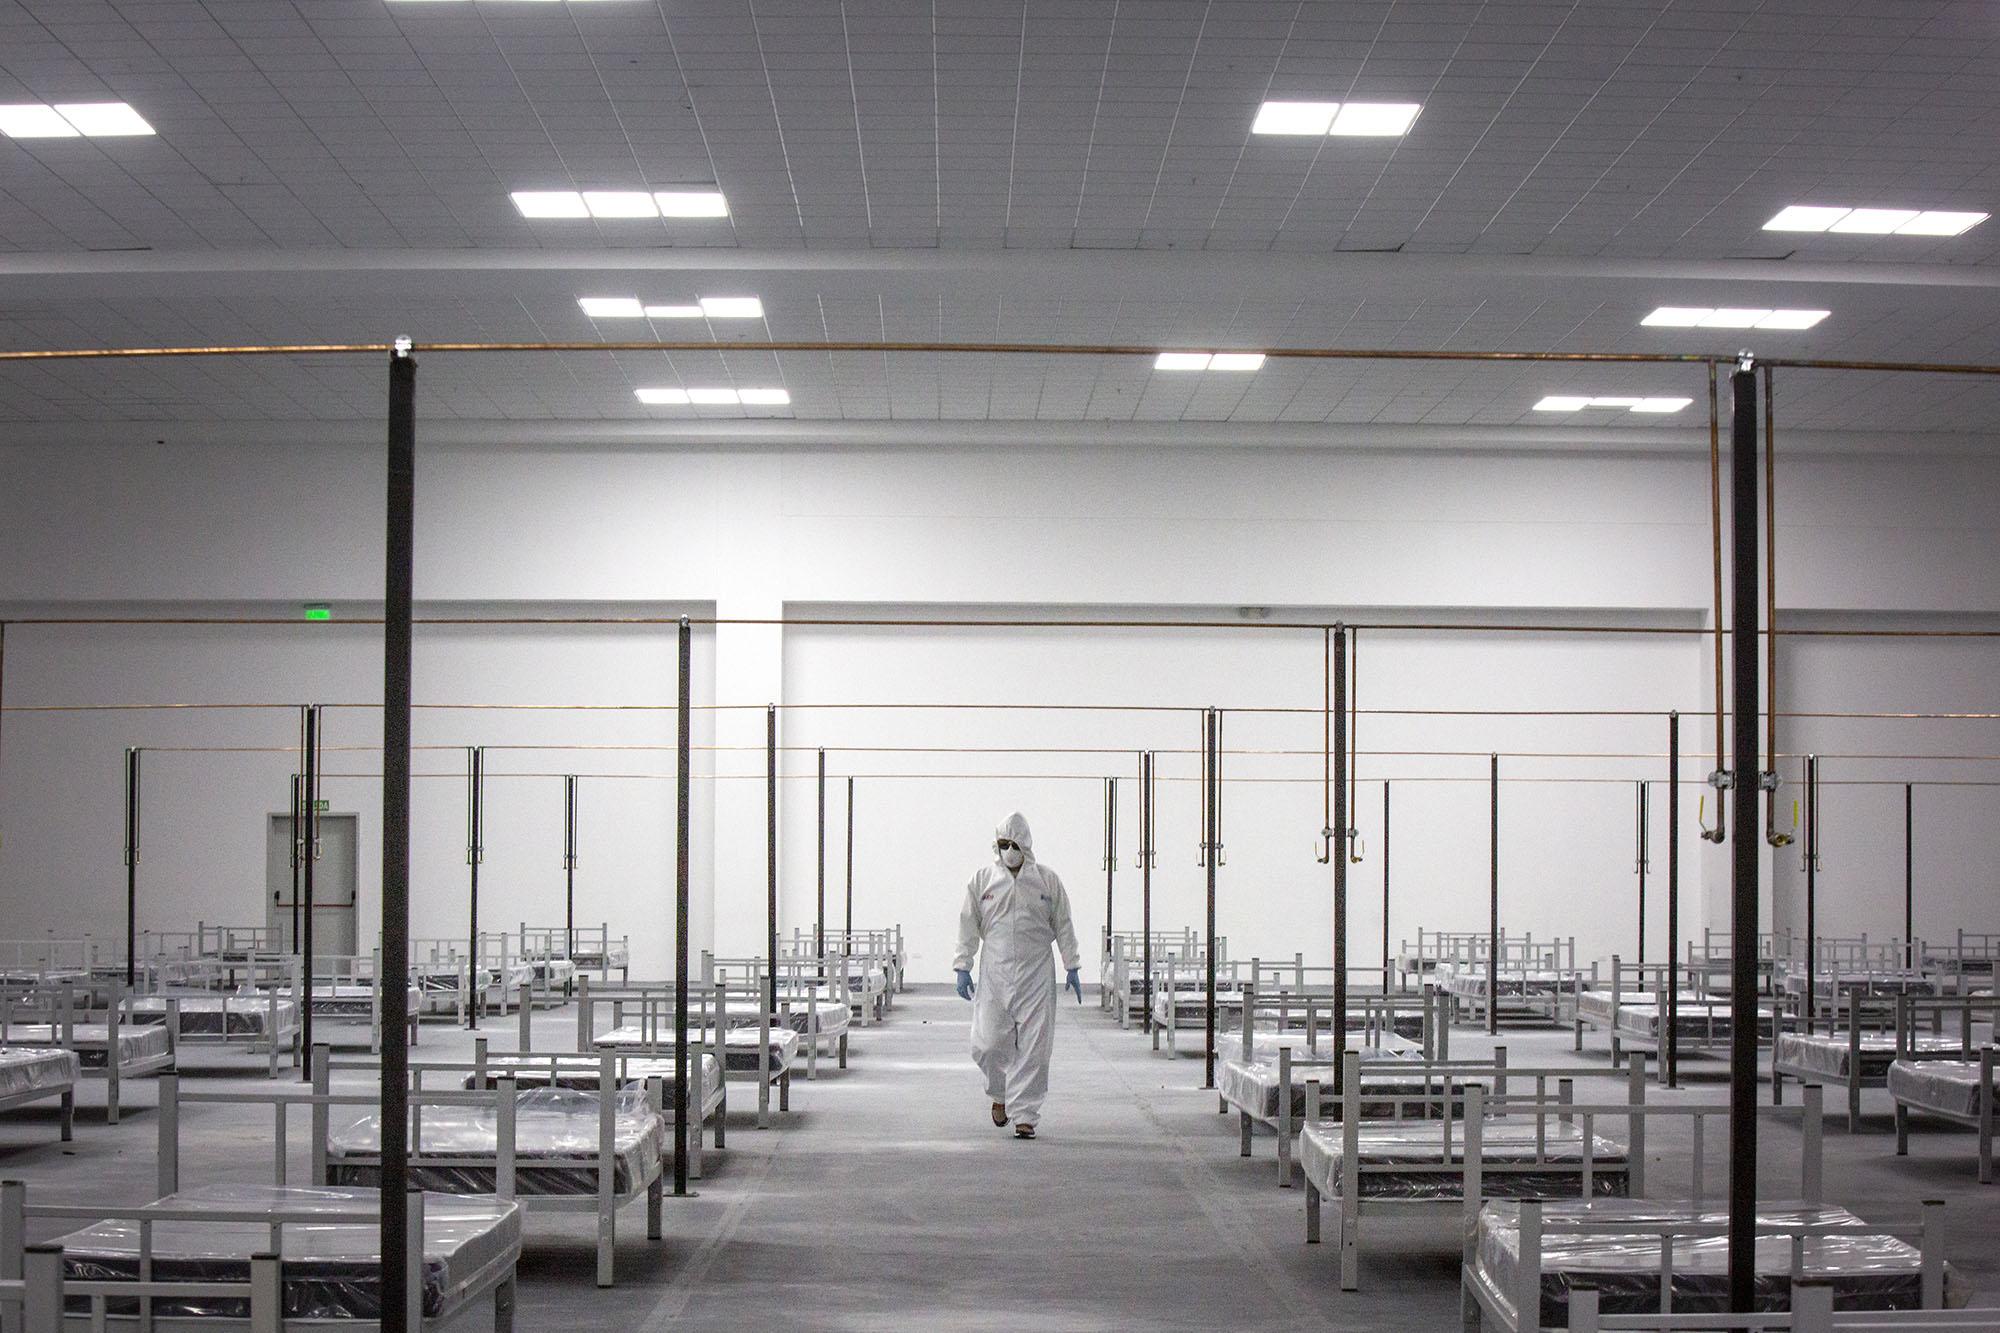 A worker during his day preparing the Temporal COVID 19 Attention Center on Thursday, Abril 30, 2020 in Quito - Ecuador. Johis Alarc&oacute;n for The New York Times